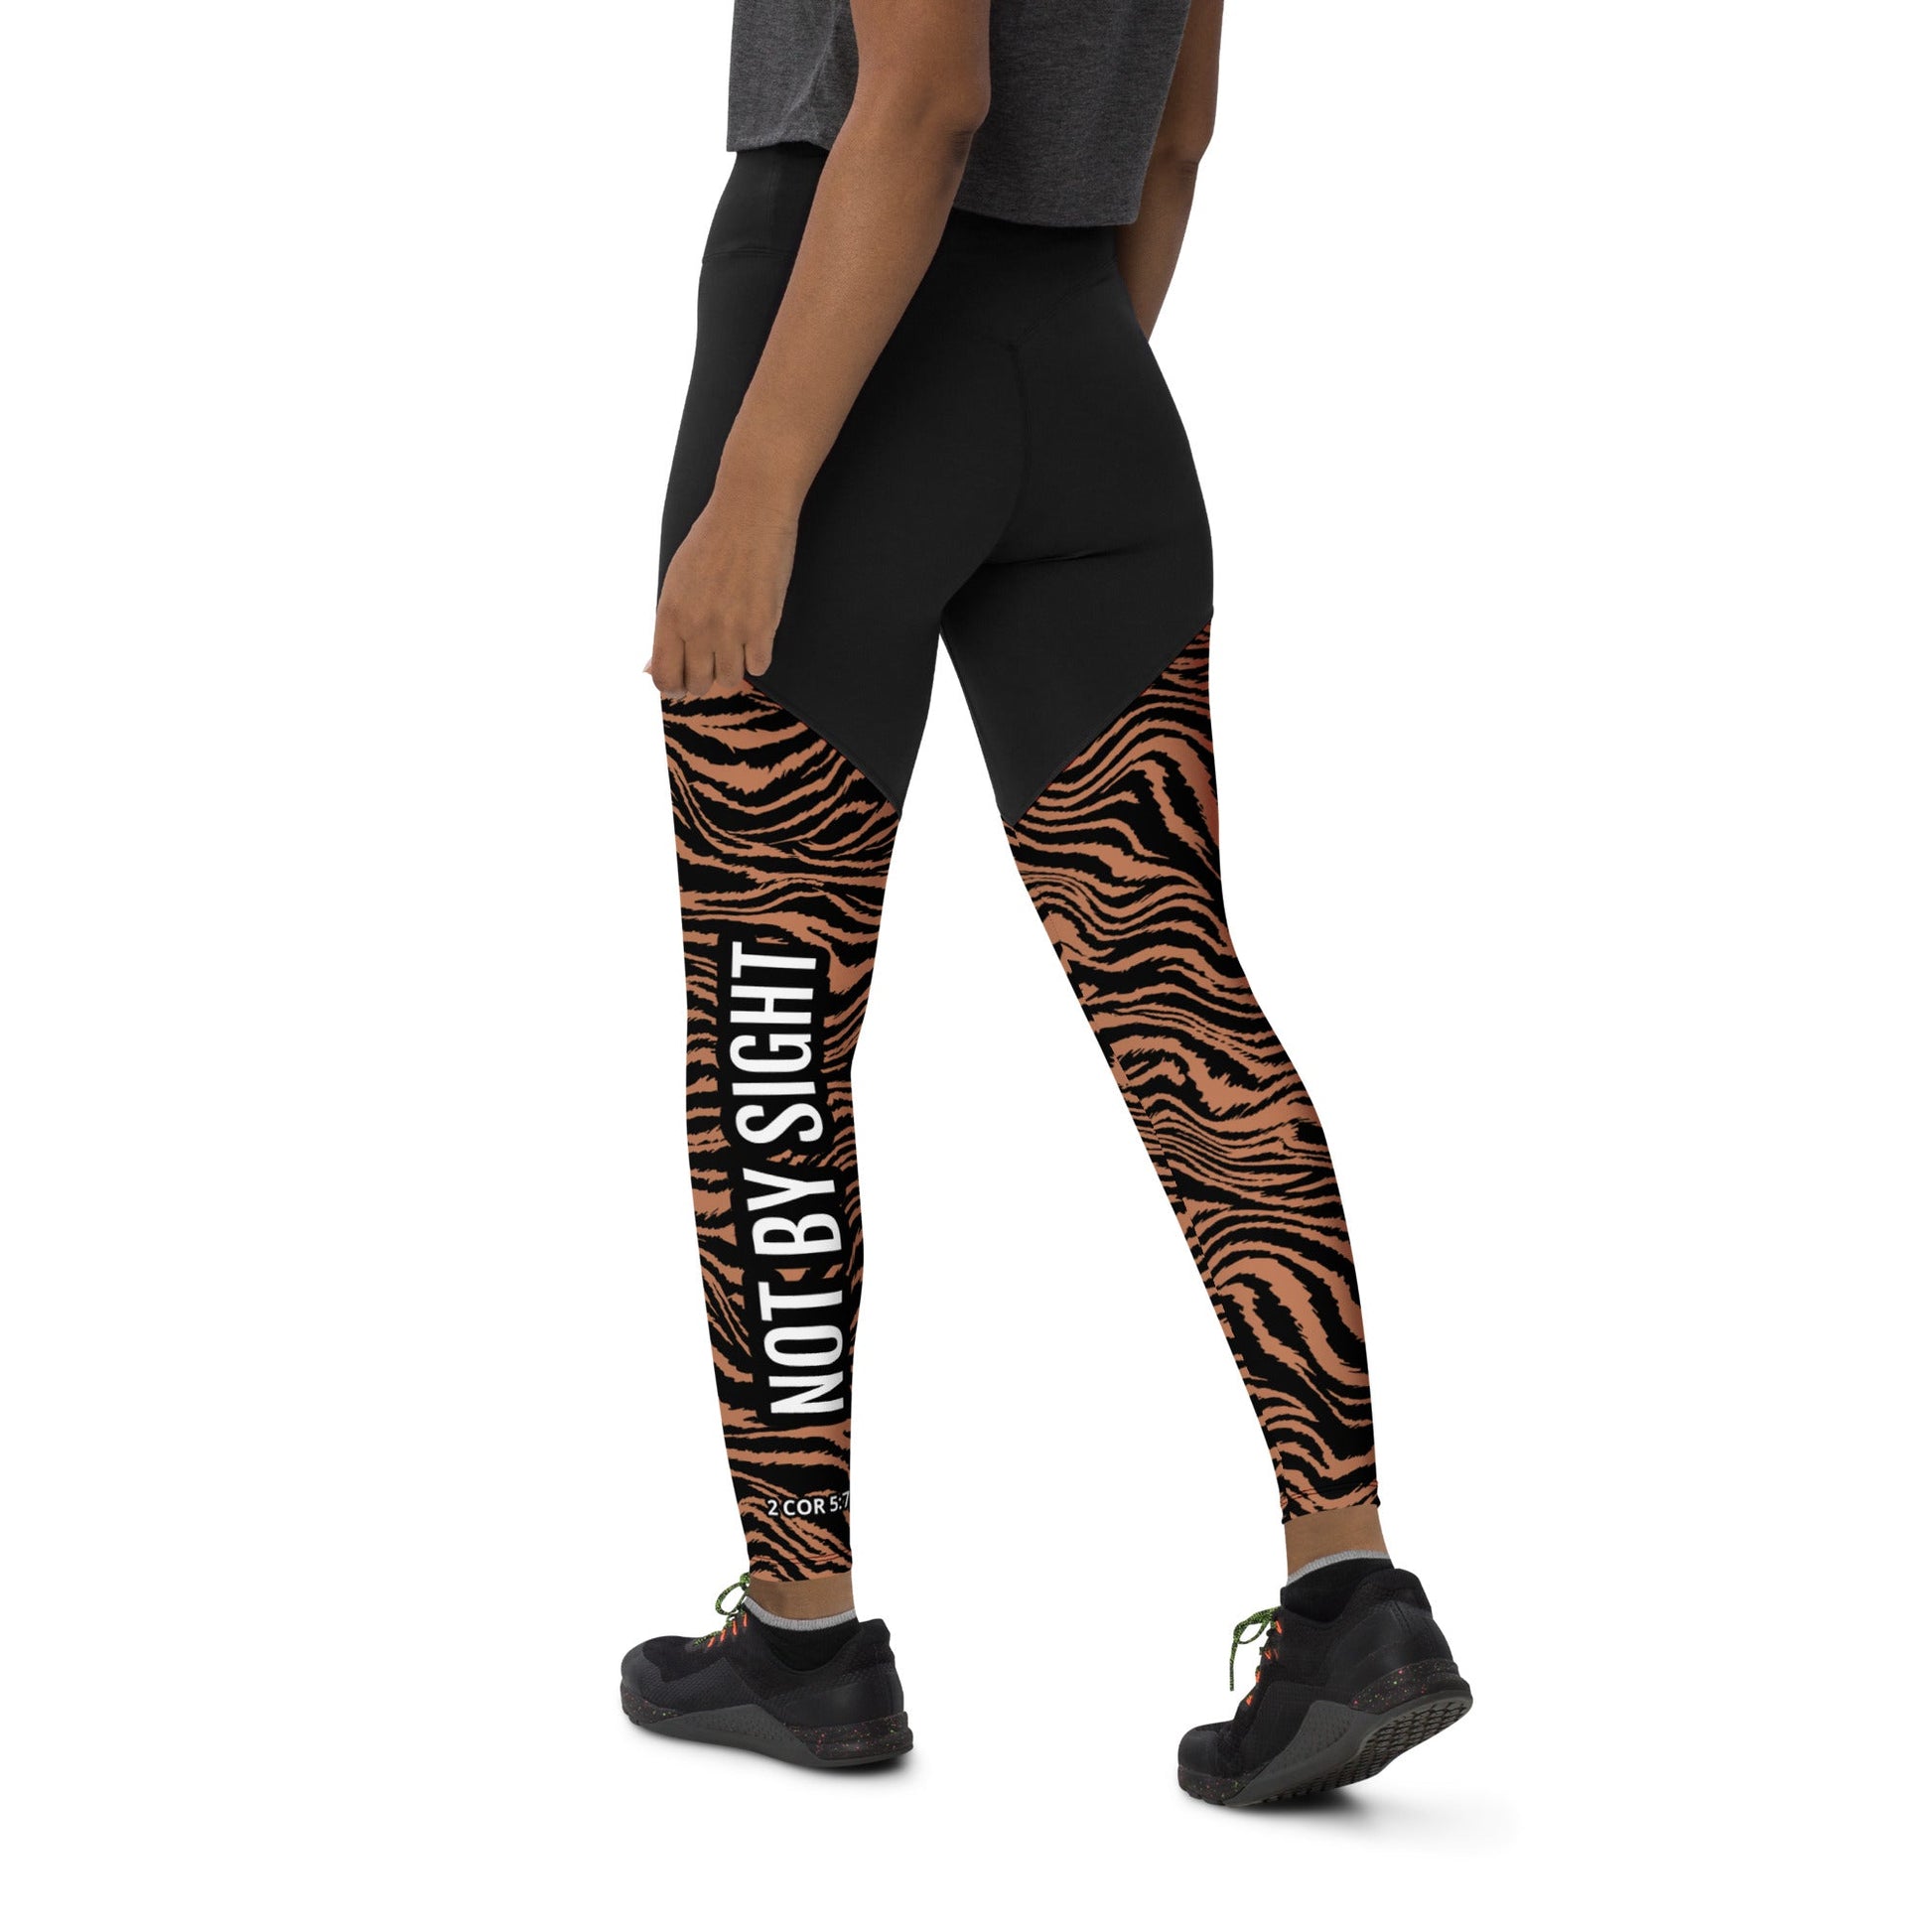 Compression Sport Leggings "Walk by faith, not by sight!" Tiger Print - faithbook